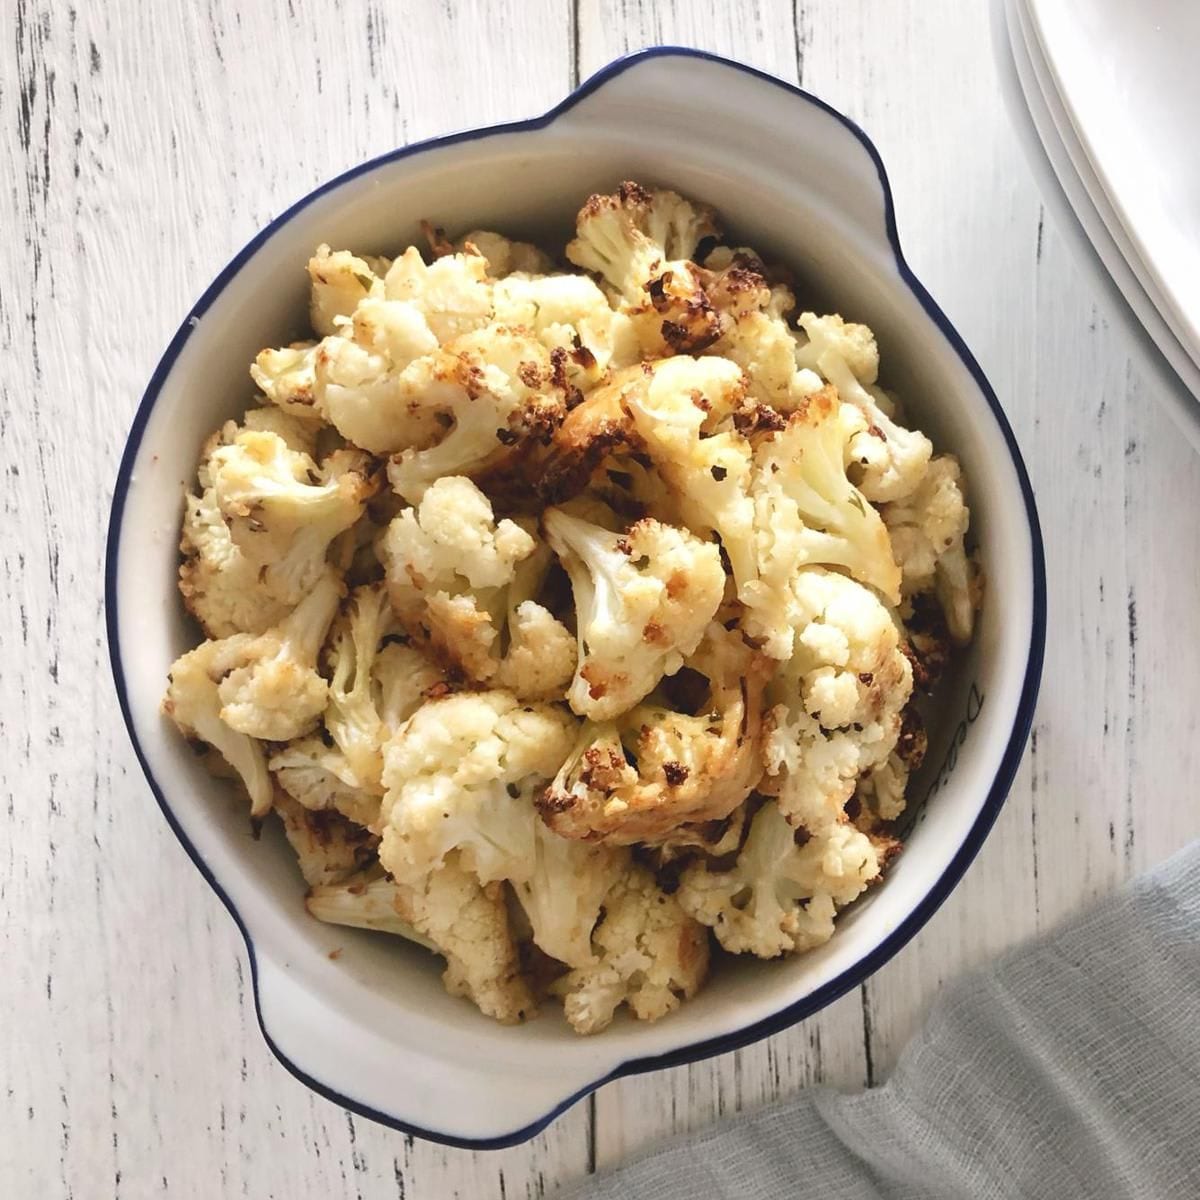 Close-up of a plate of home-cook parmesan cheese roasted cauliflower